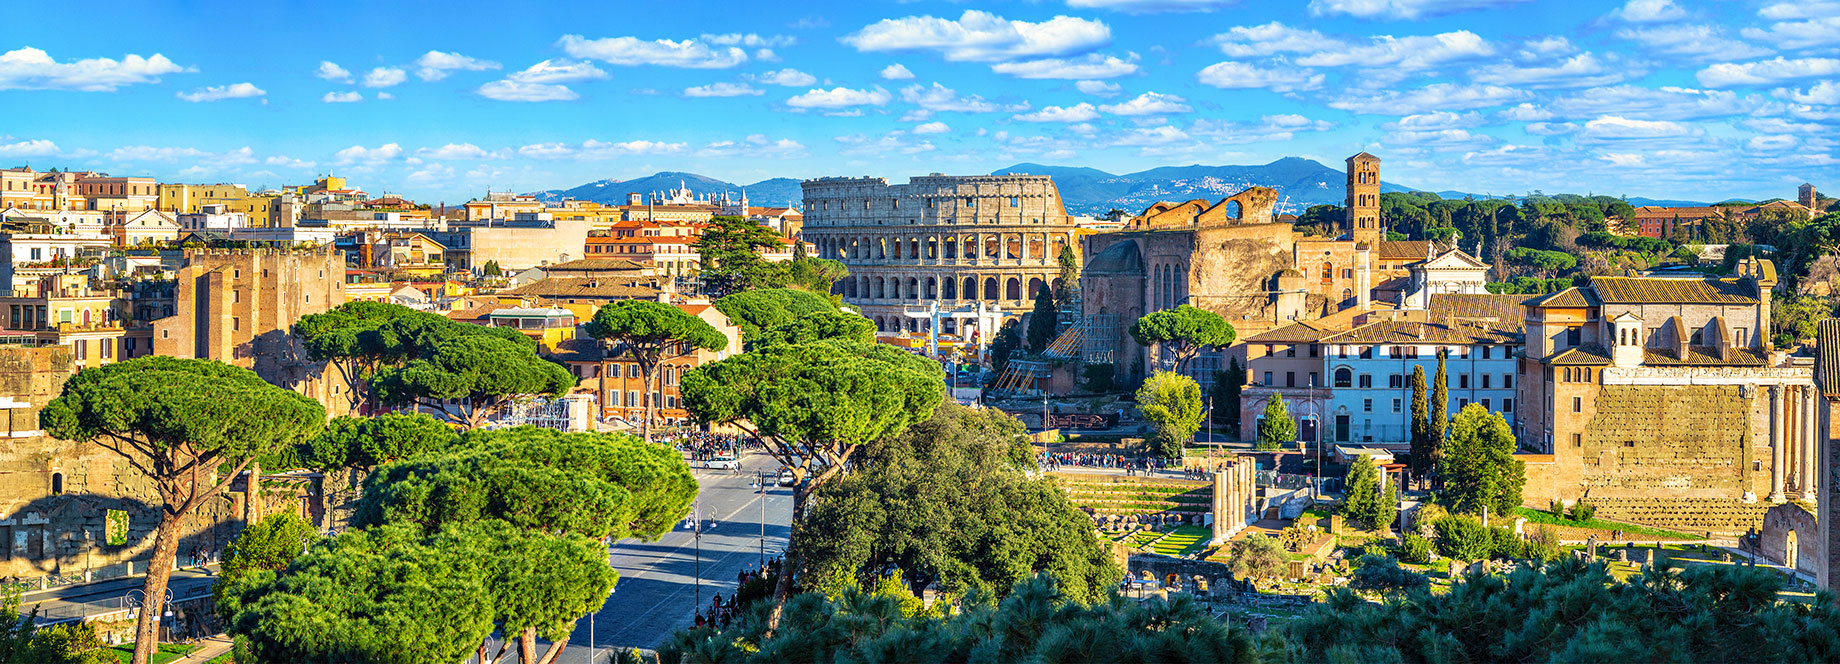 Panorama View of Rome, Italy – Colosseum and Roman Forum